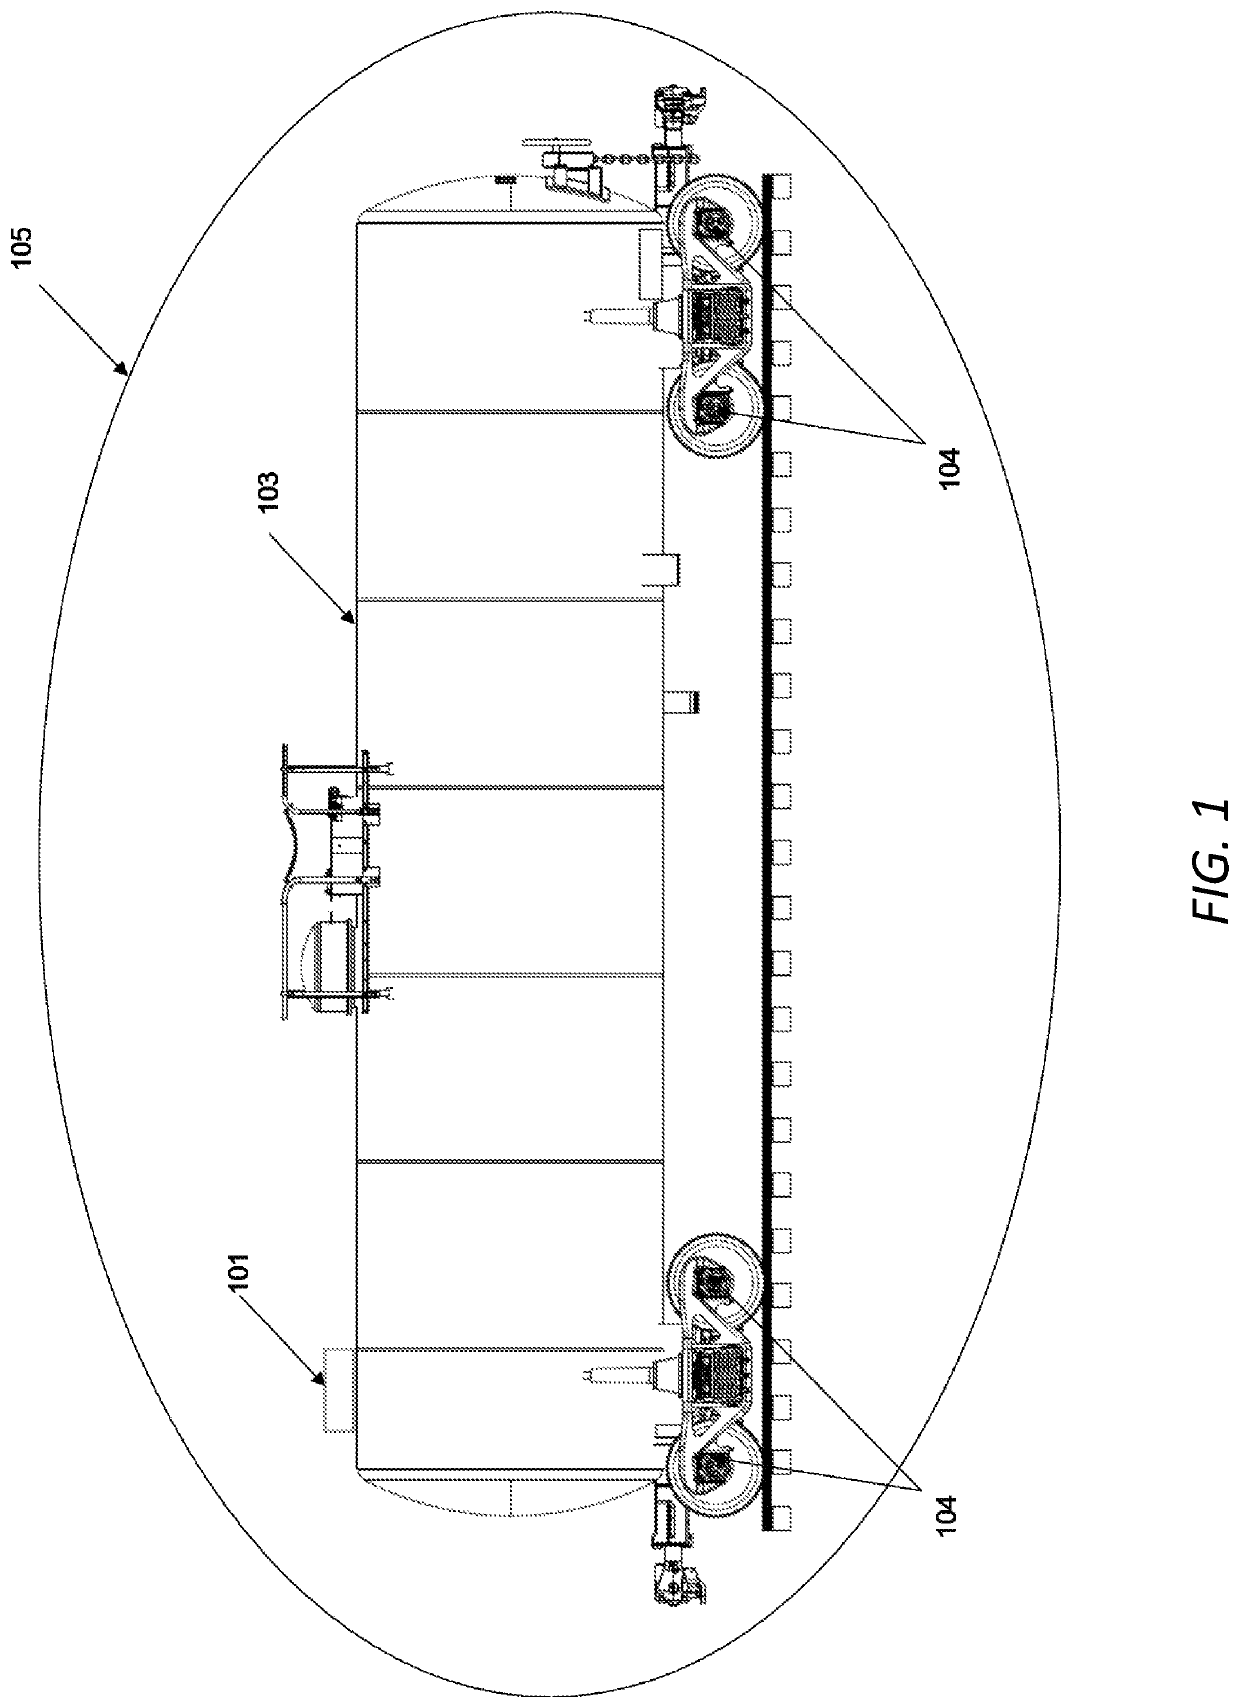 System, method and apparatus for monitoring the health of railcar wheelsets